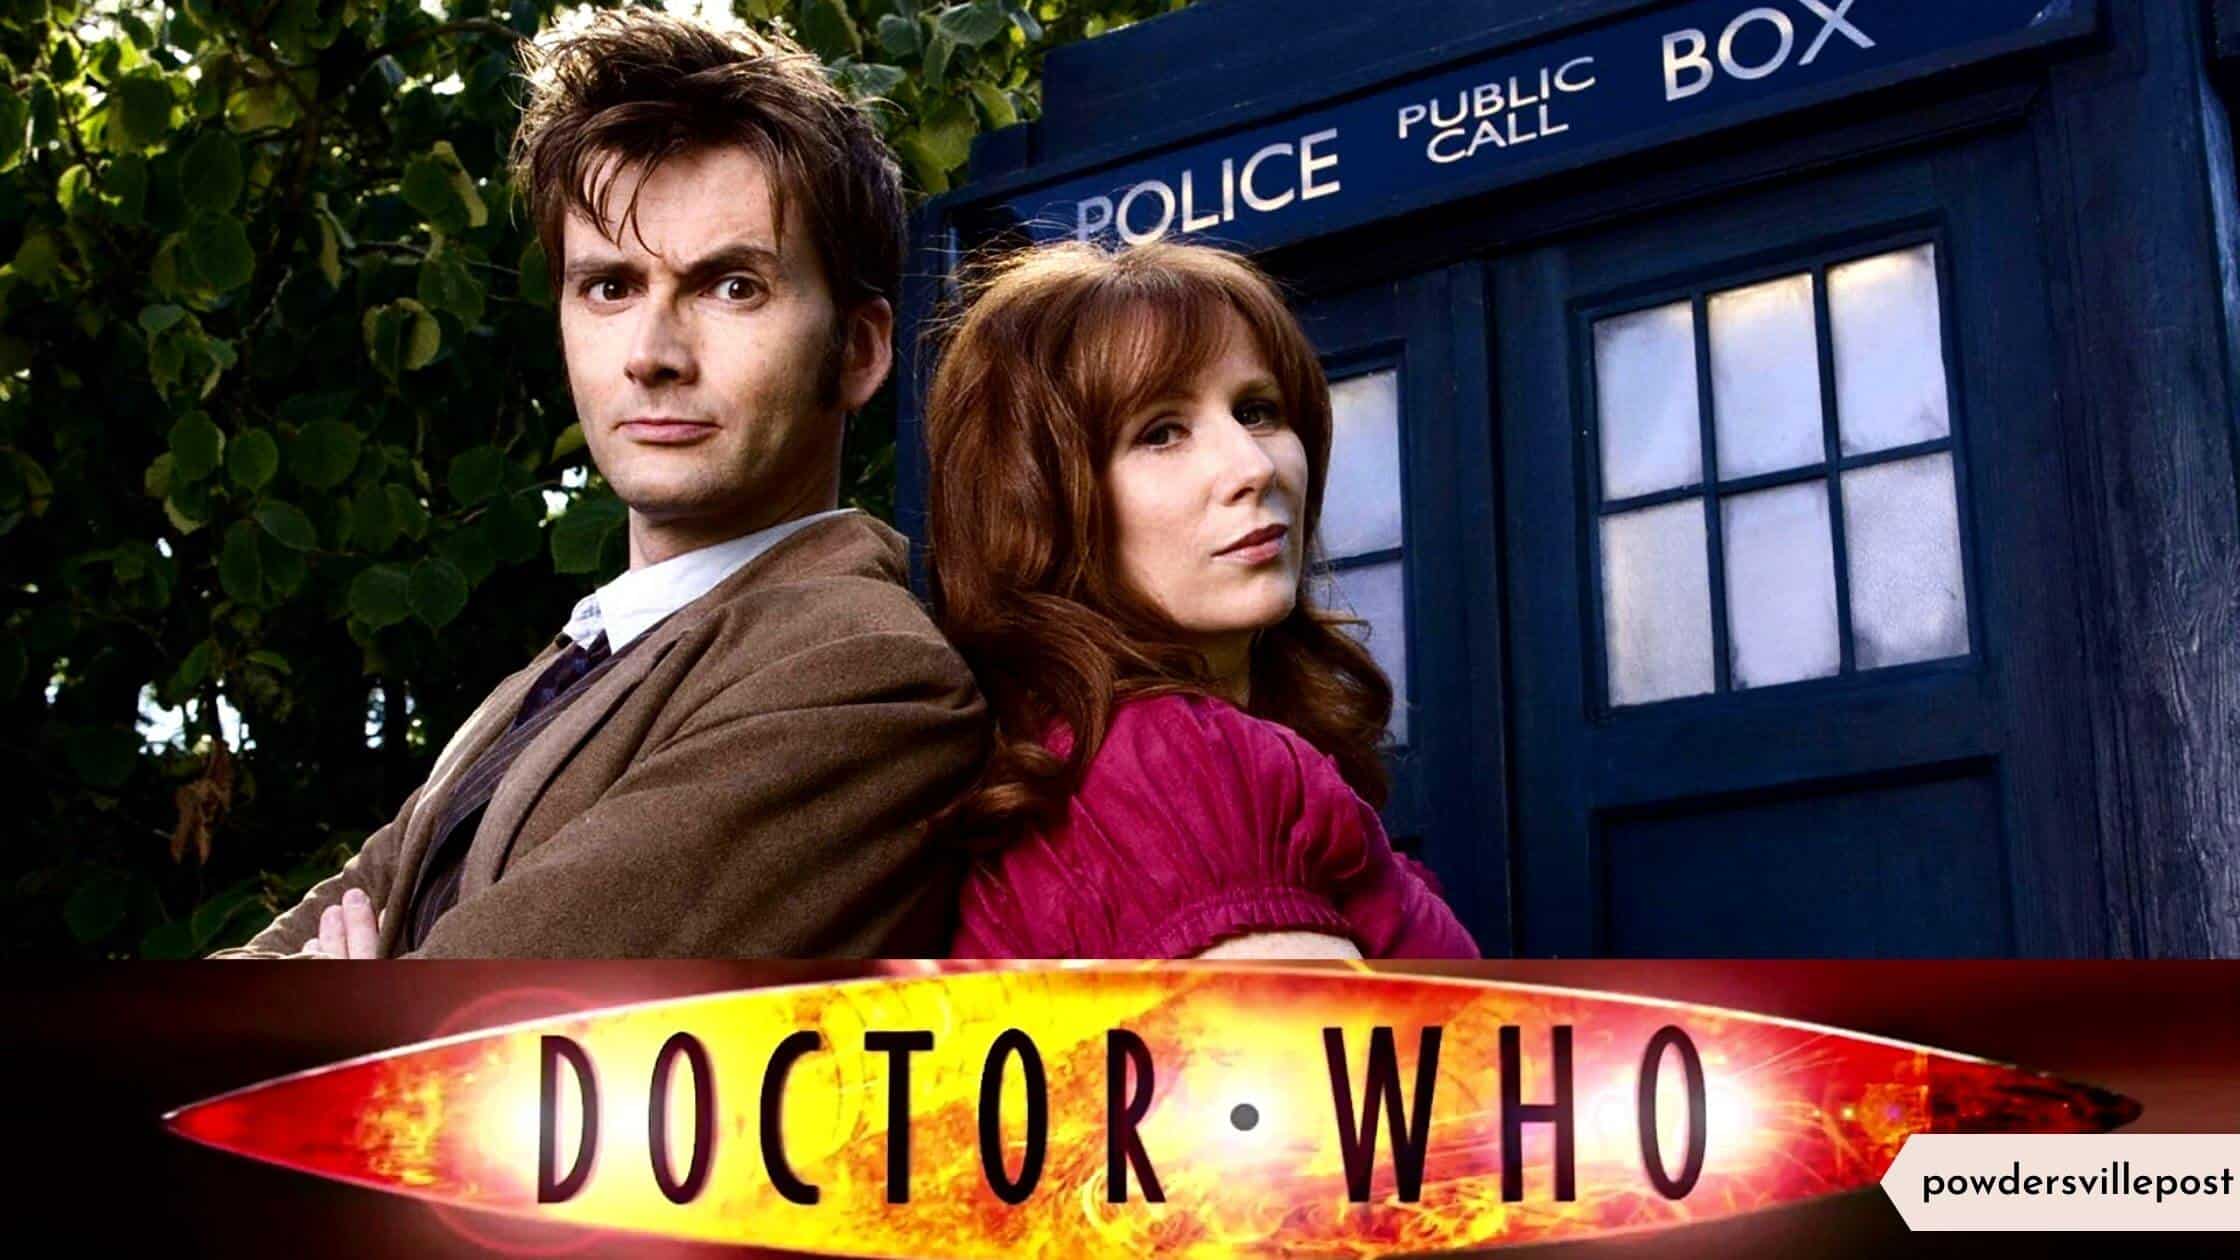 'Doctor Who' David Tennant And Catherine Tate Return For 60th Anniversary